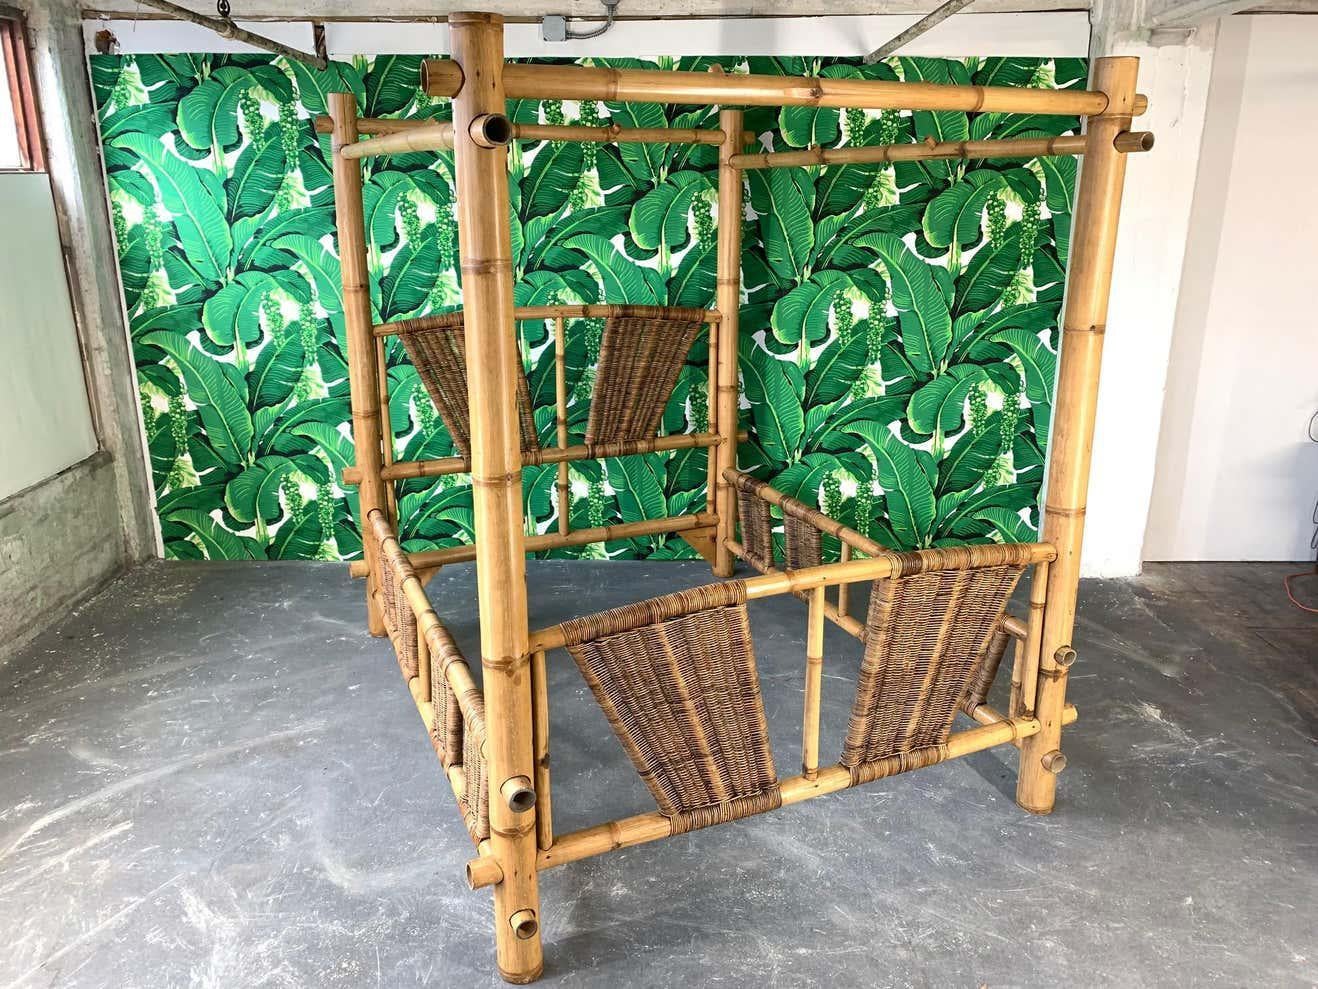 Queen size canopy bed constructed from oversized bamboo. Rattan detailing woven throughout. Very good vintage condition with only minor signs of age appropriate wear.
Measures: Total width 76